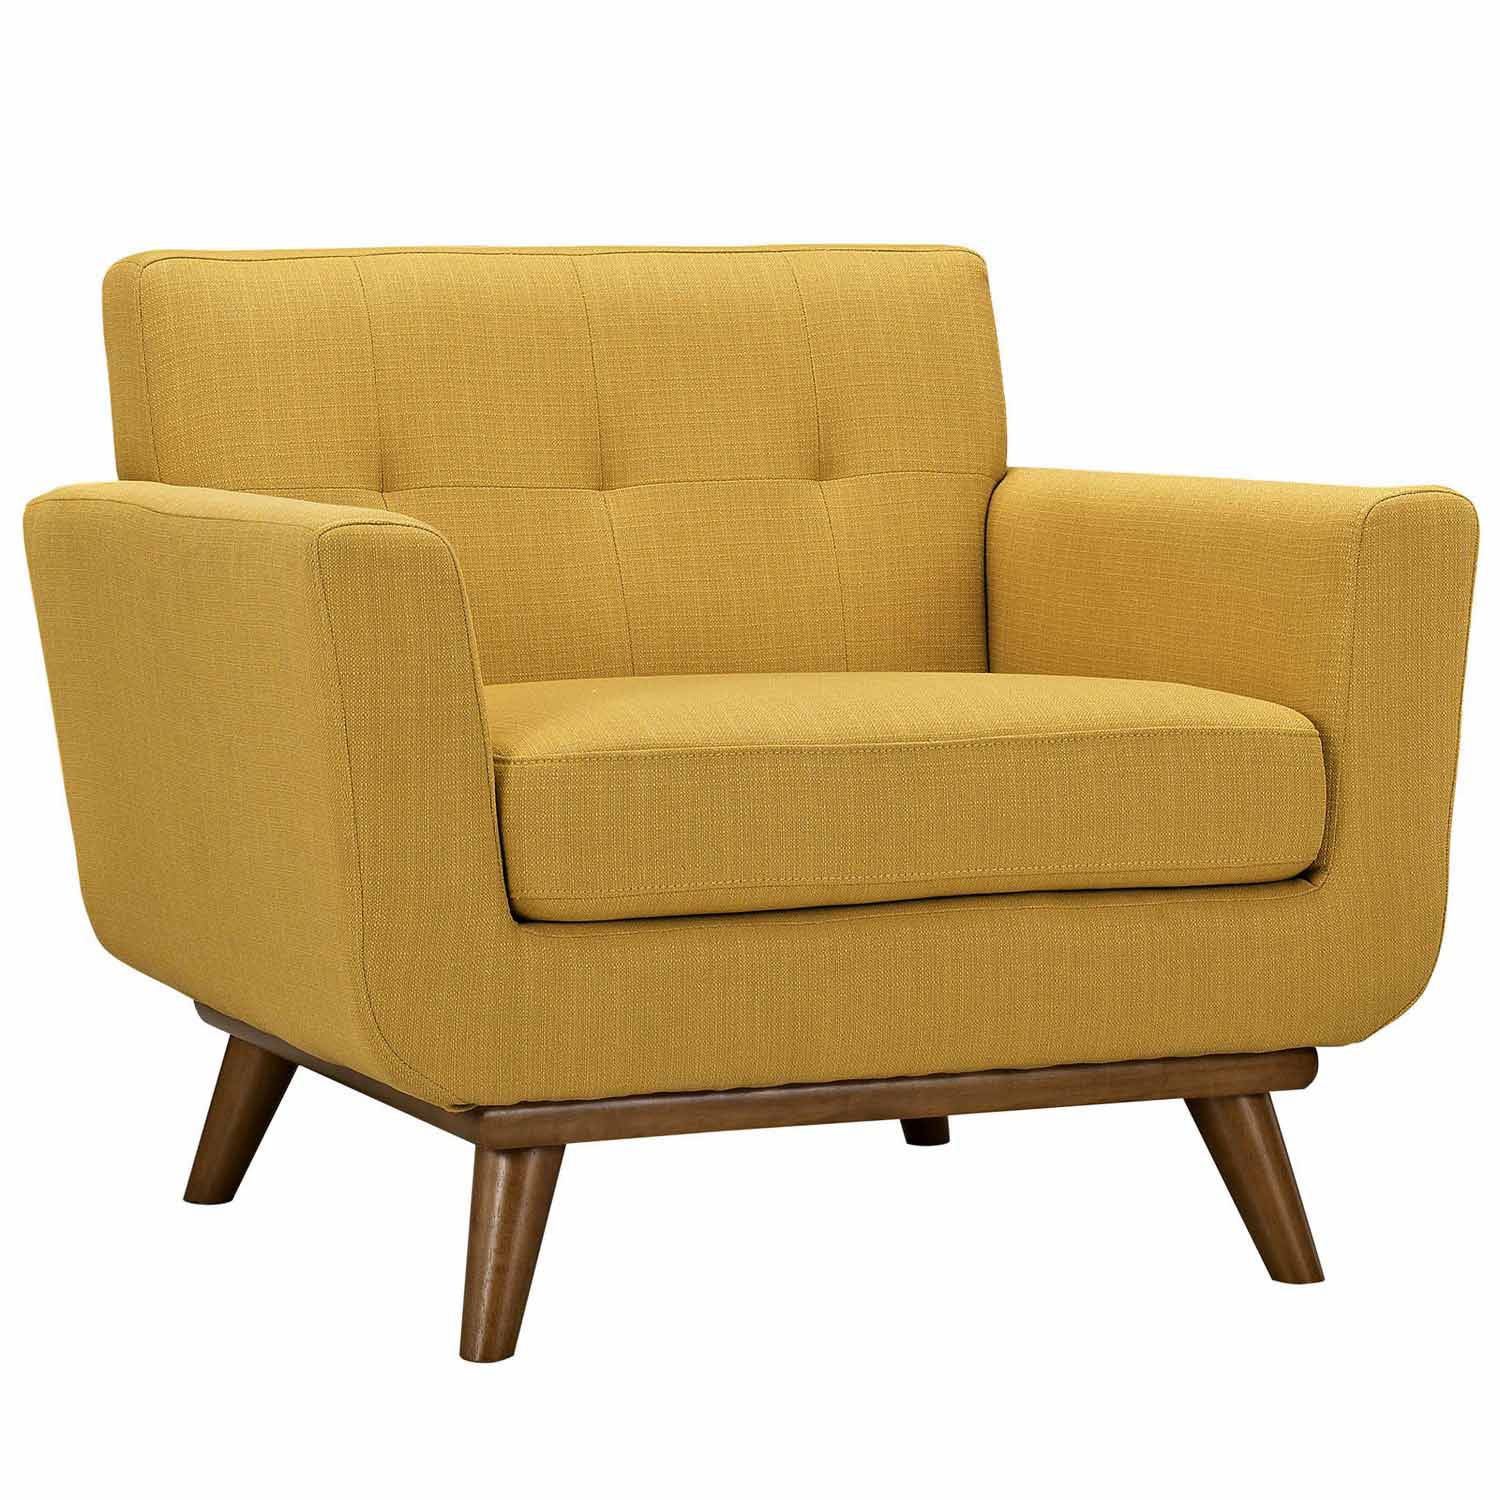 Modway Engage Armchairs and Loveseat Set of 3 - Citrus